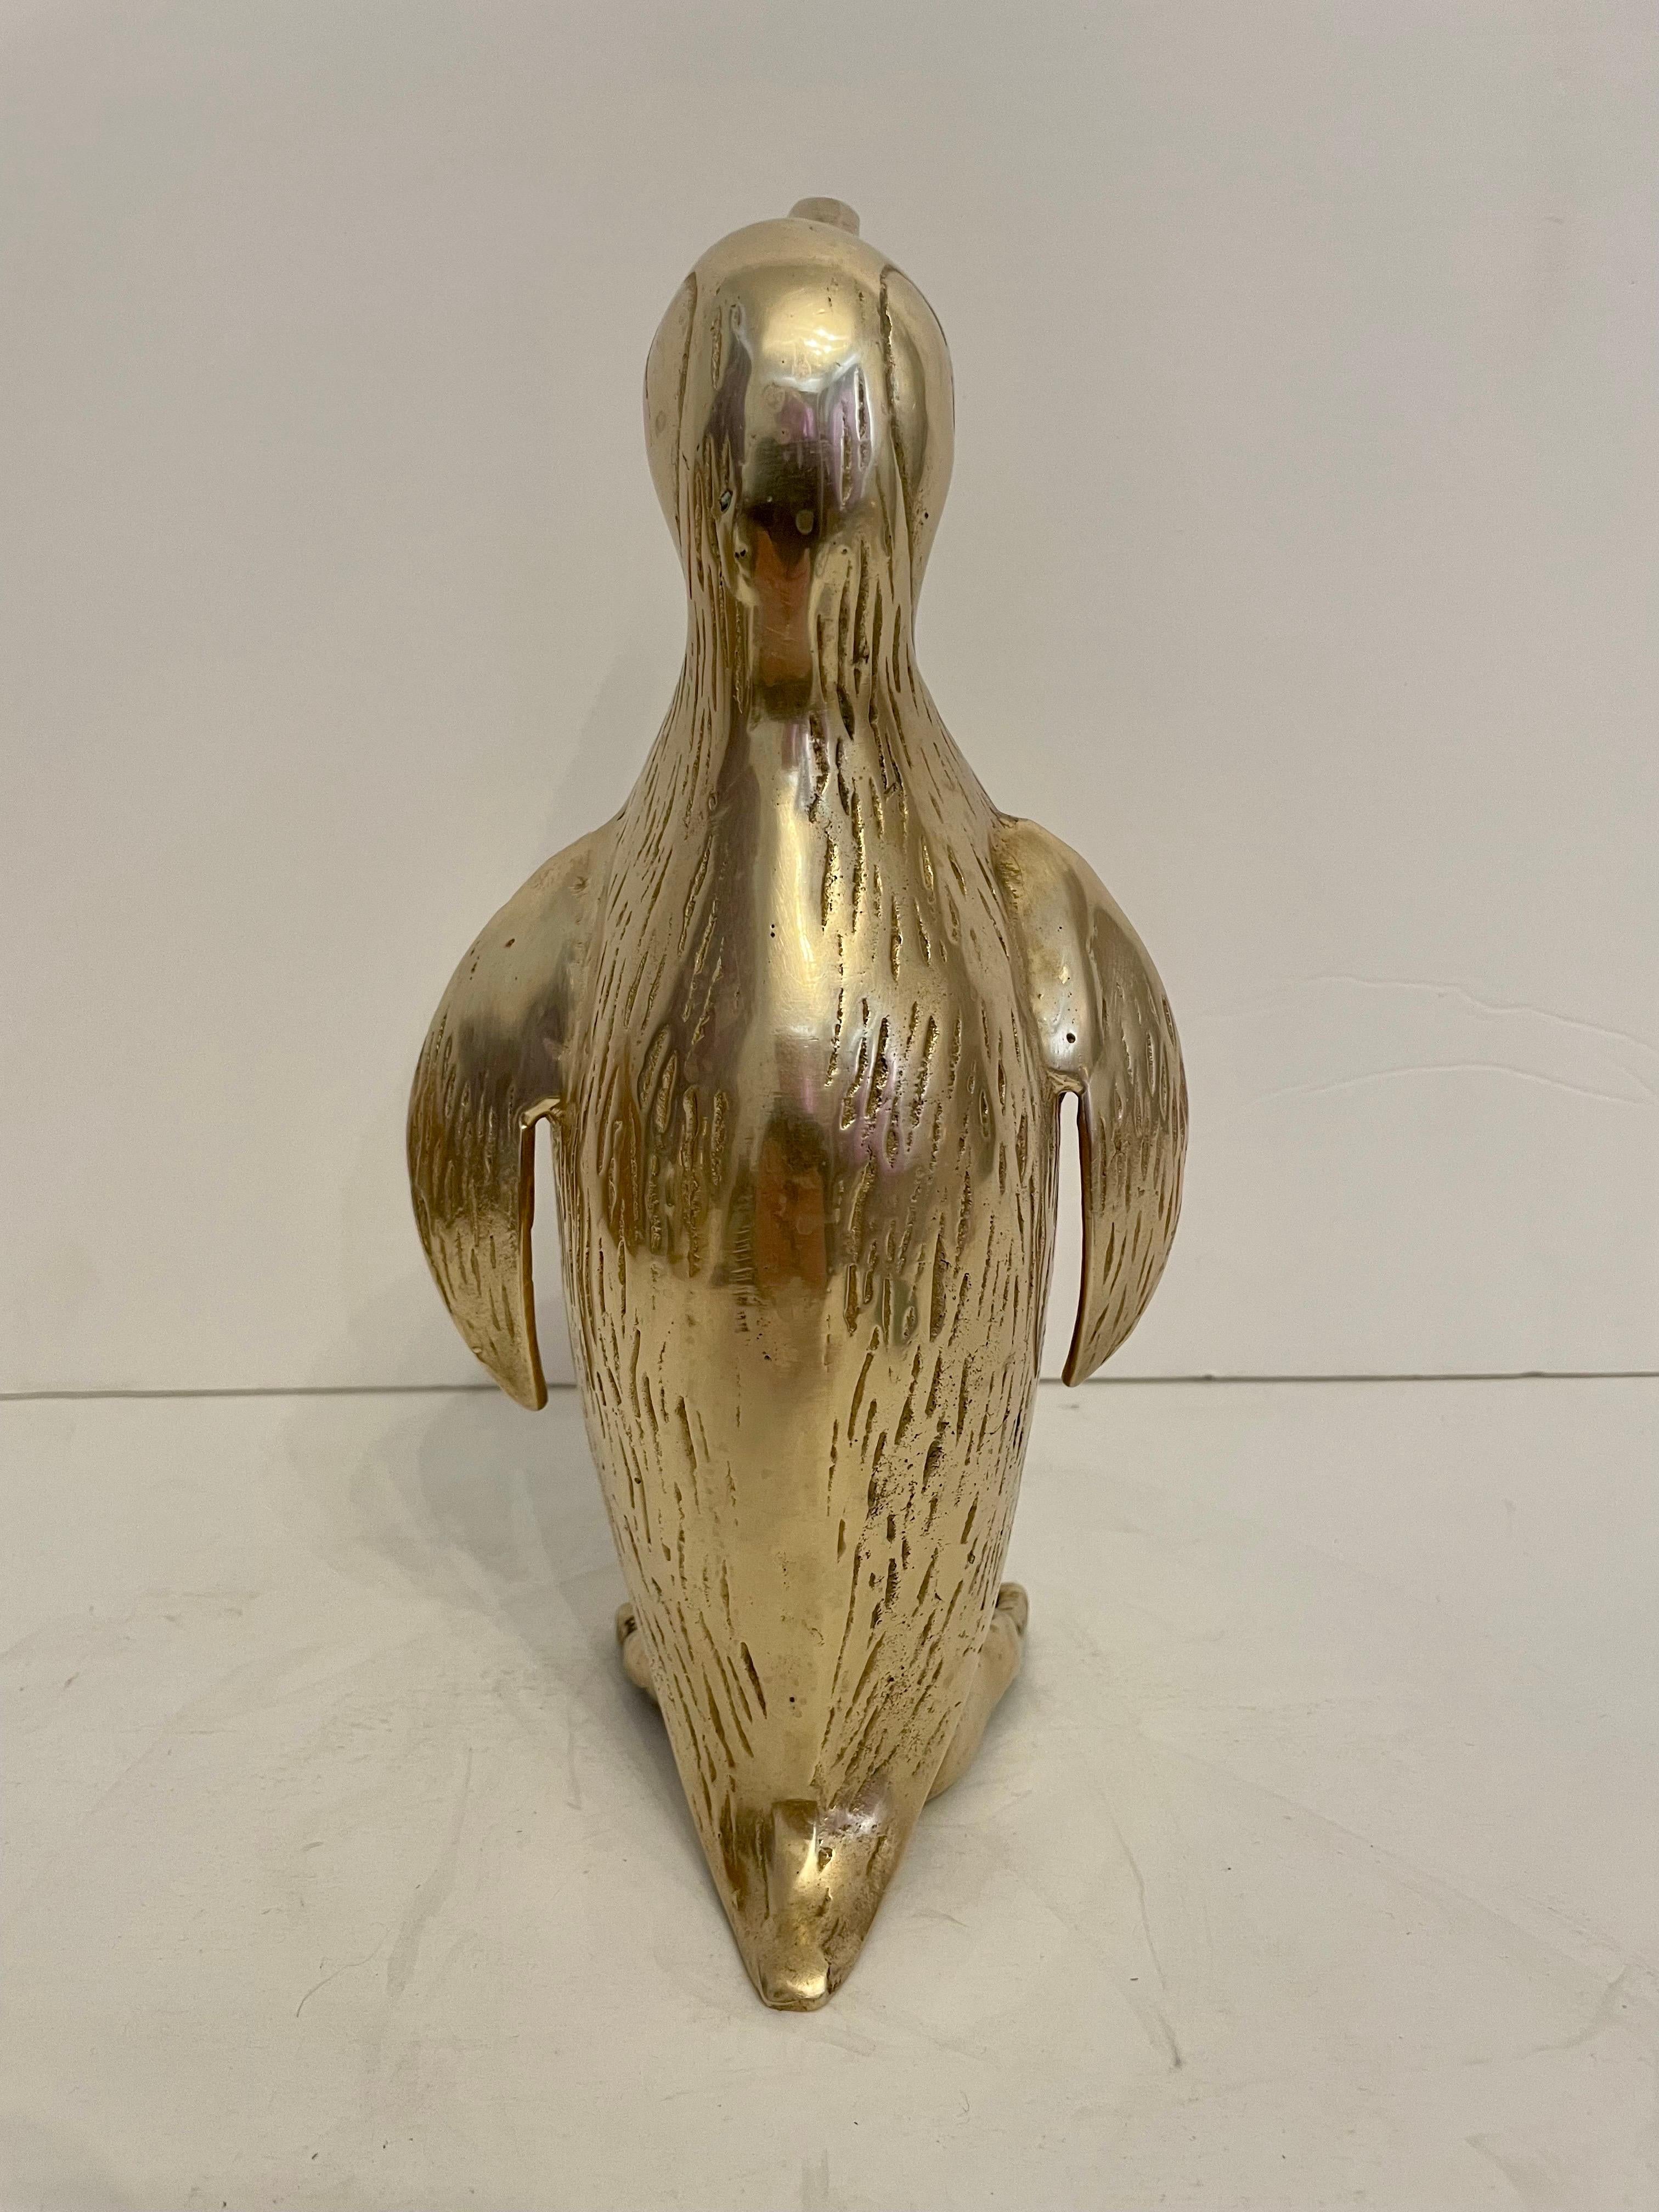  Large Vintage Hollywood Regency Brass Penguin Sculpture In Good Condition For Sale In New York, NY